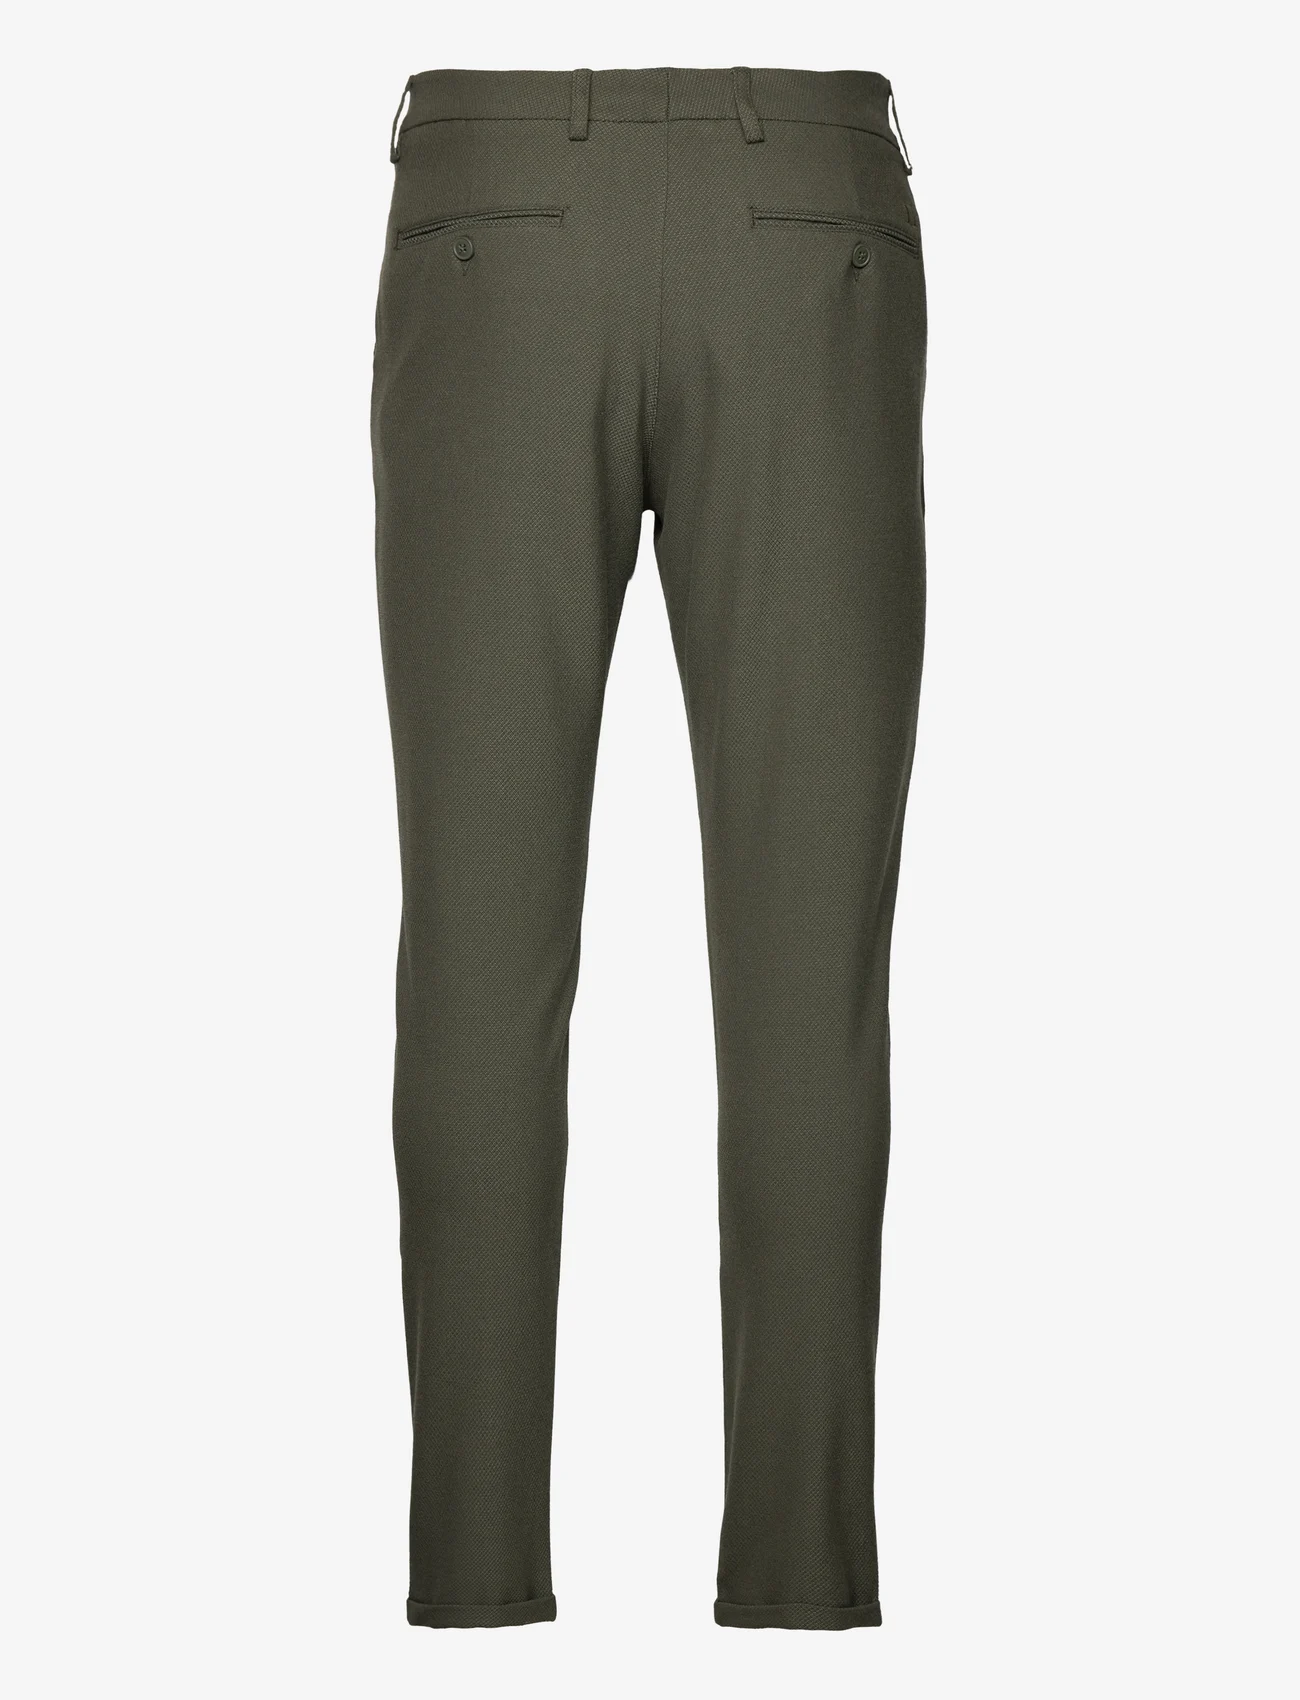 Les Deux - Como Dobby Suit Pants - olive night/thyme green - 1